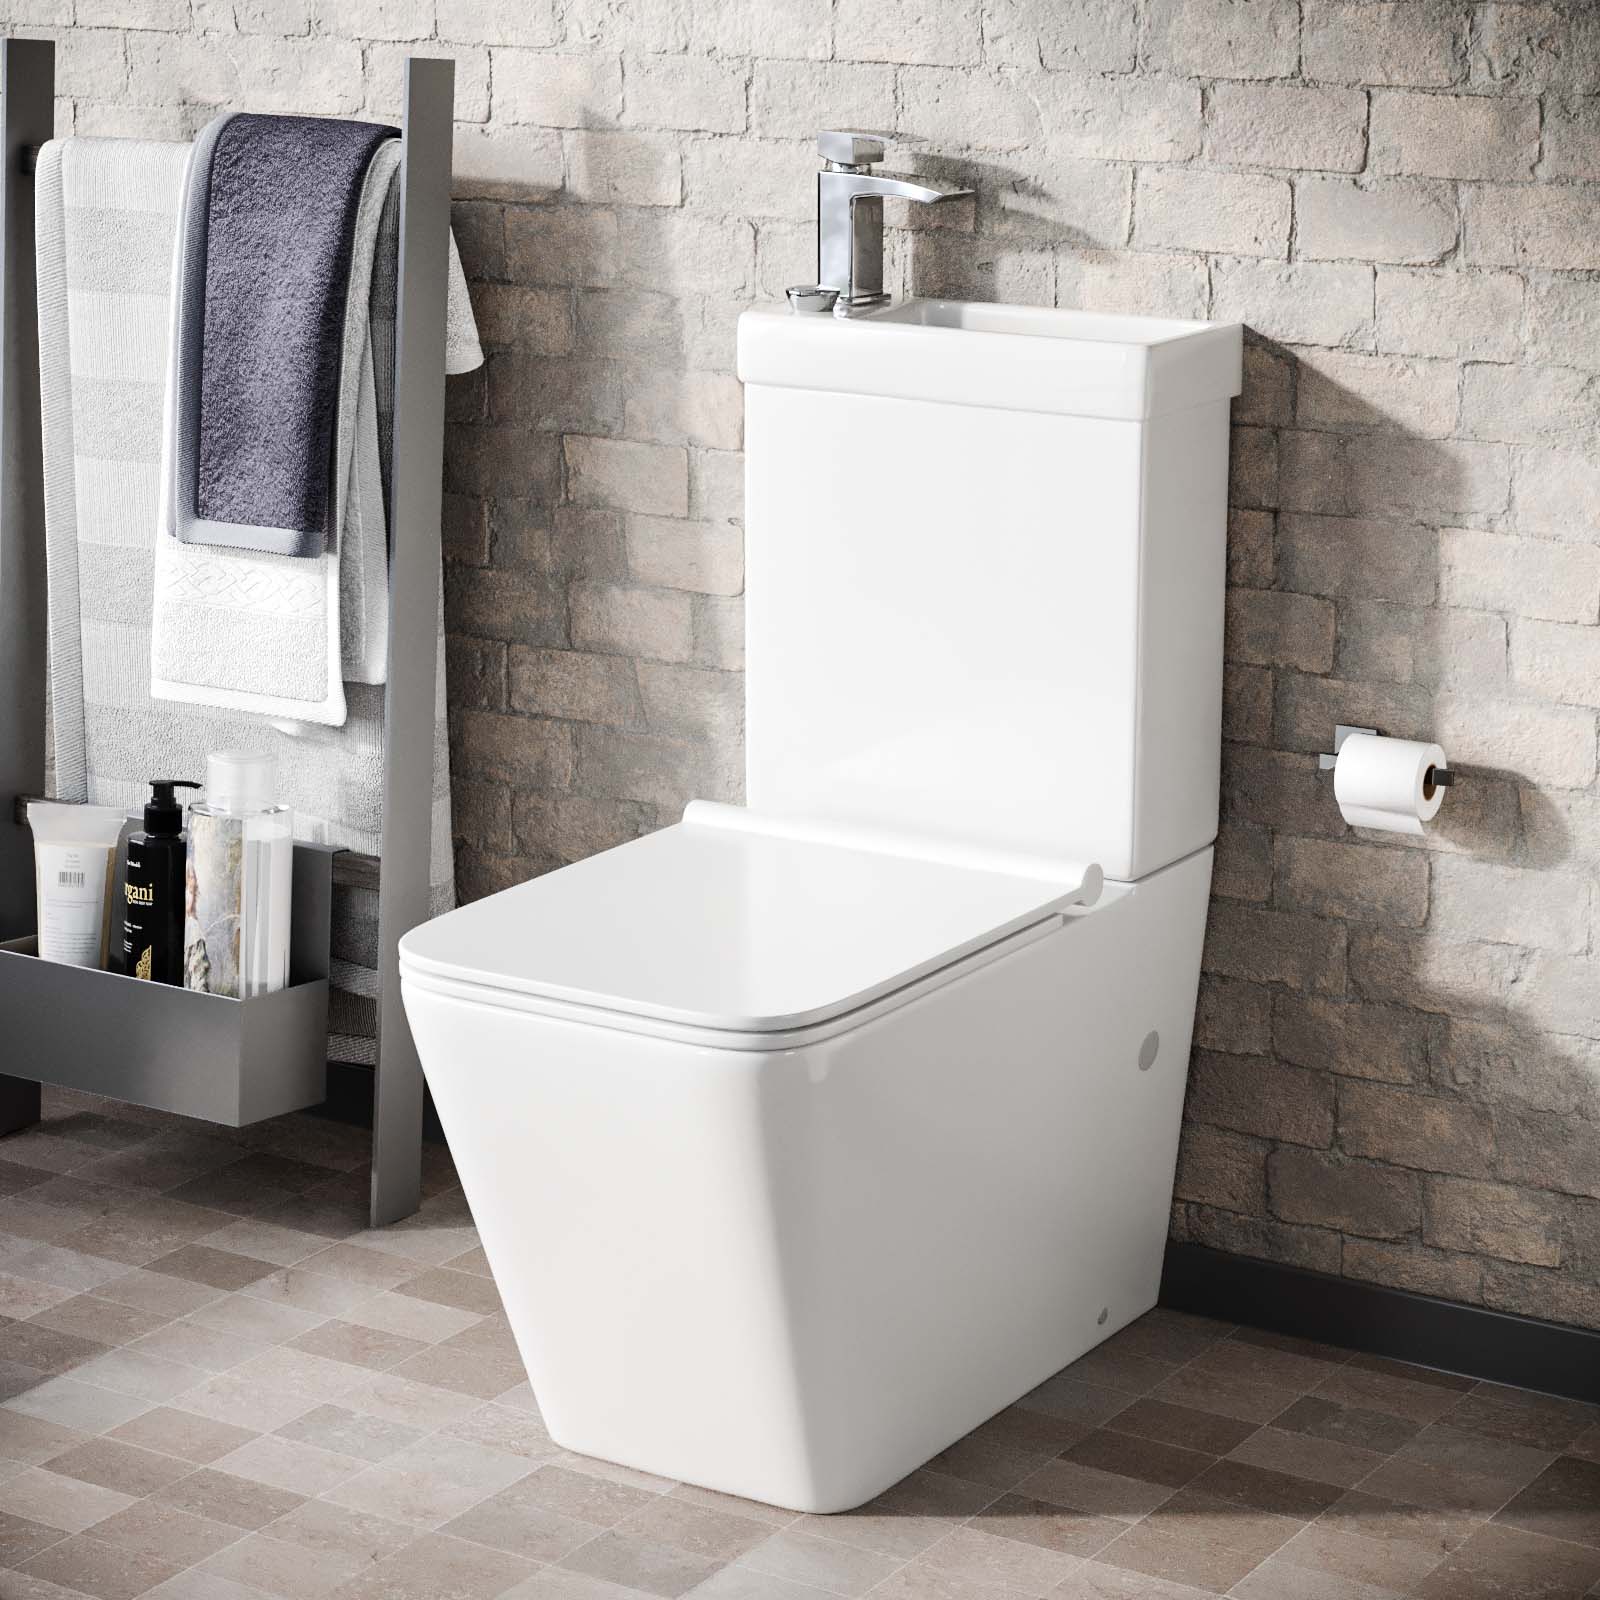 Nova 2 in 1 Combo Toilet and Basin Space Saver Unit